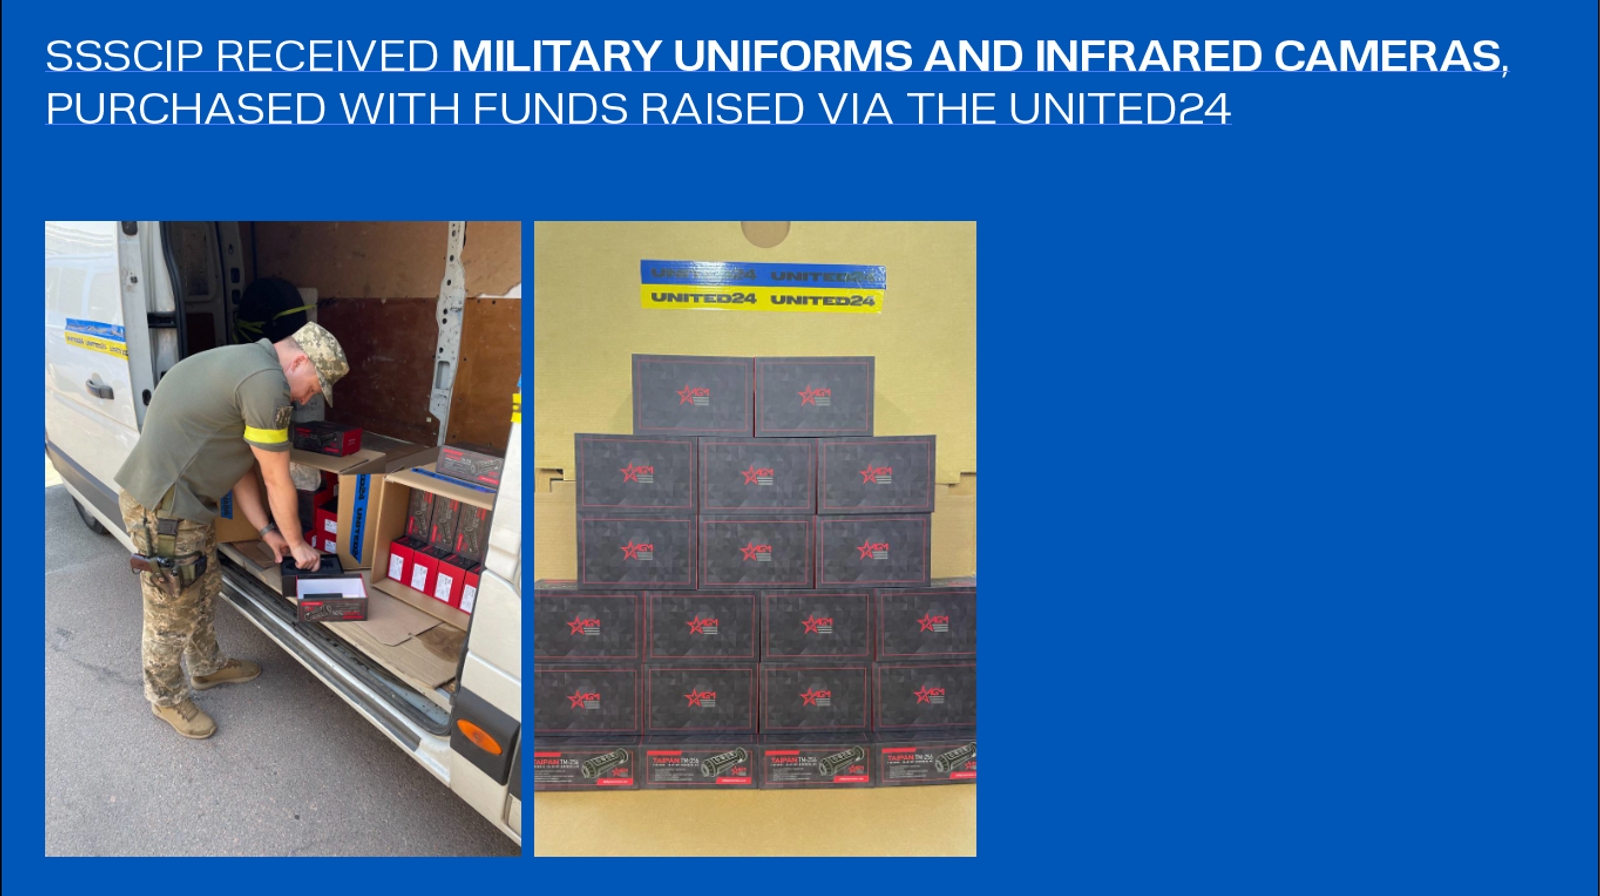 SSSCIP Received Military Uniforms and Infrared Cameras, Purchased With Funds Raised via the UNITED24